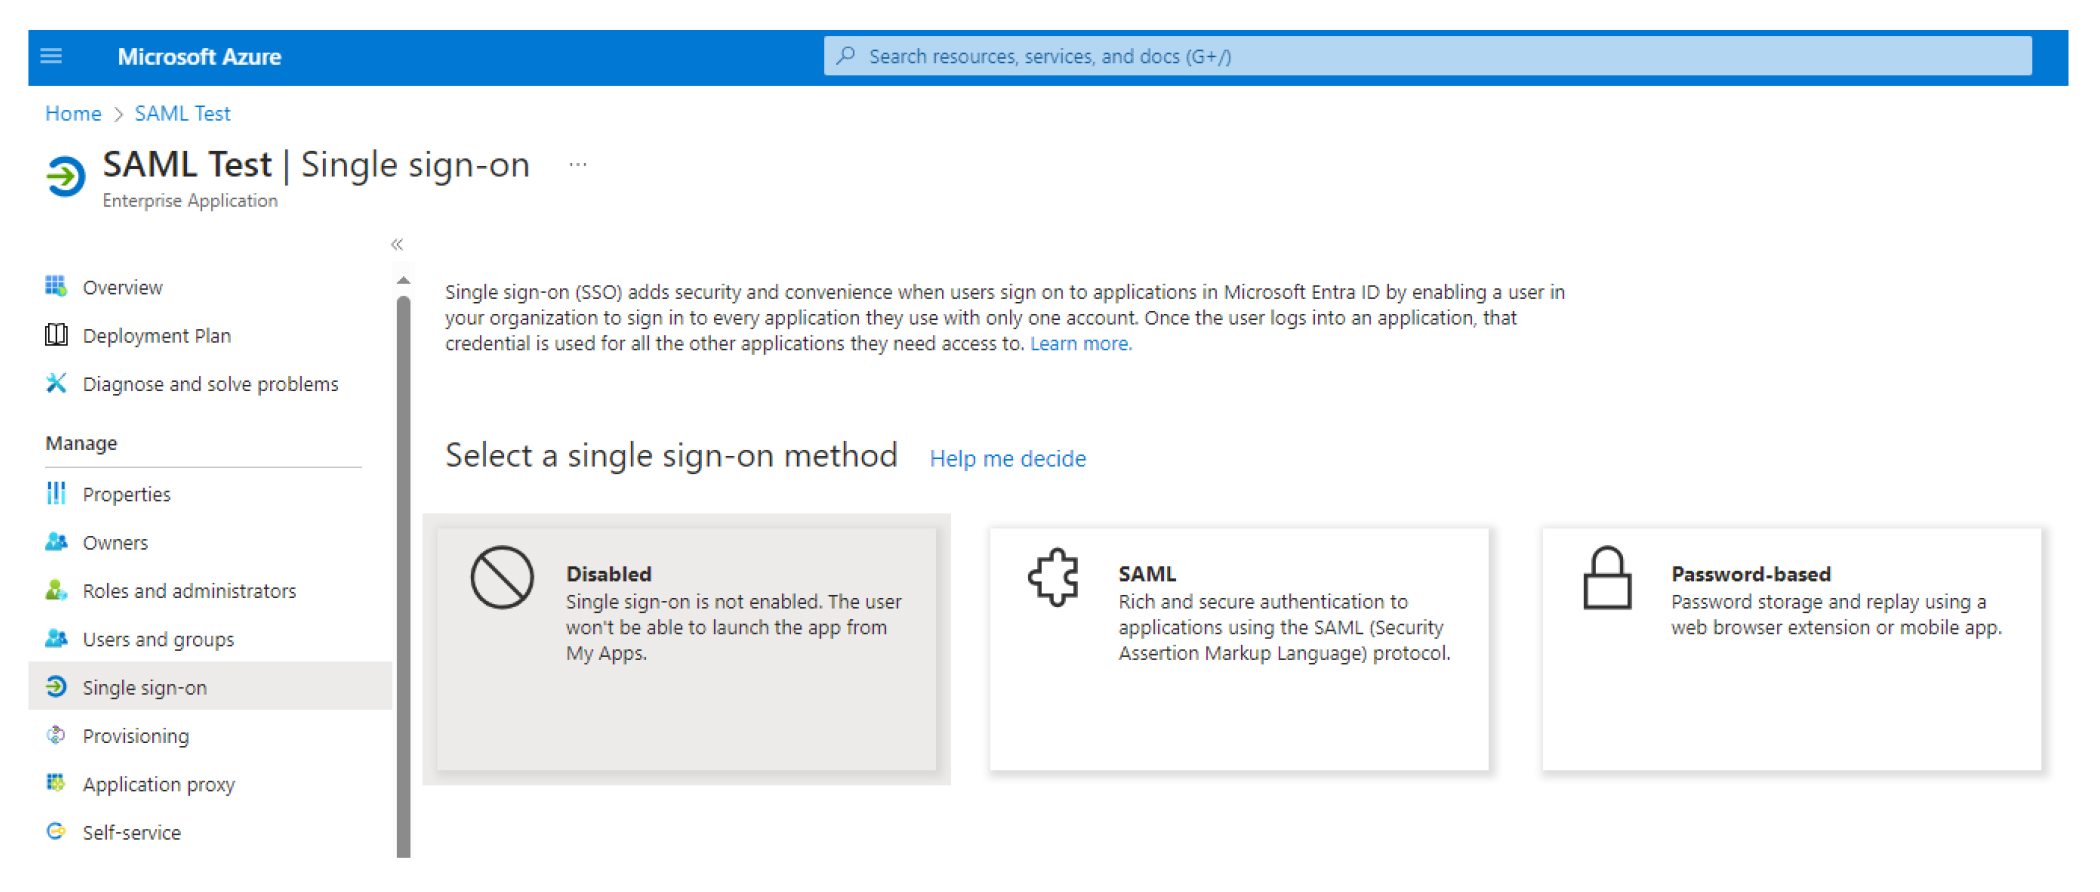 A screenshot showing the Single sign-on page.